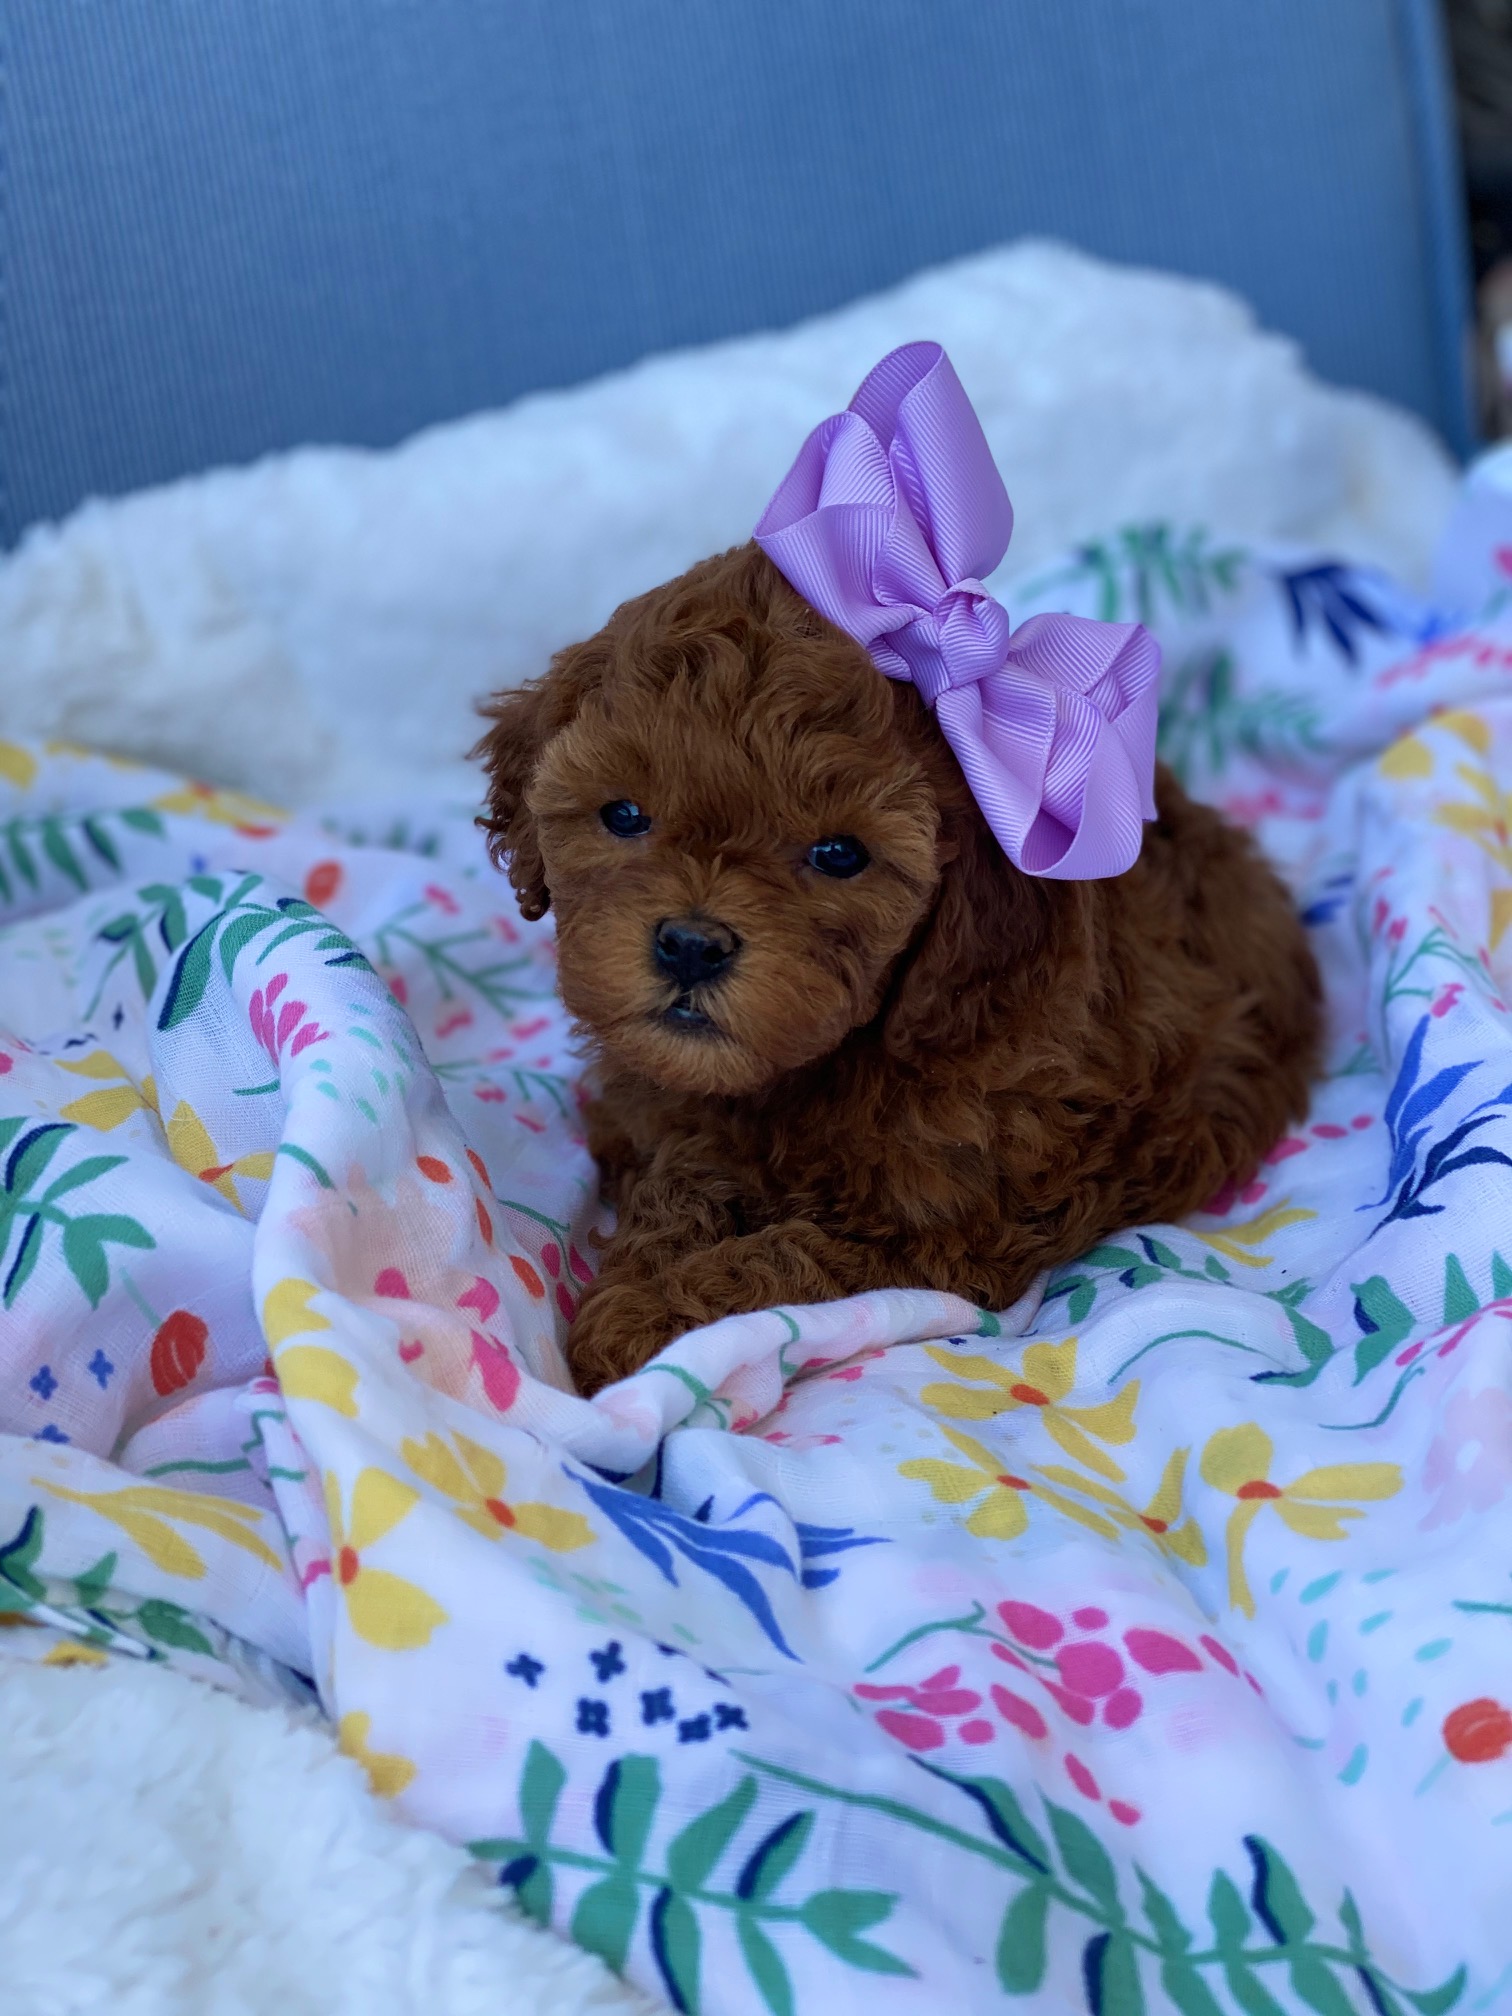 A small brown puppy with a purple bow rests peacefully on a soft blanket.